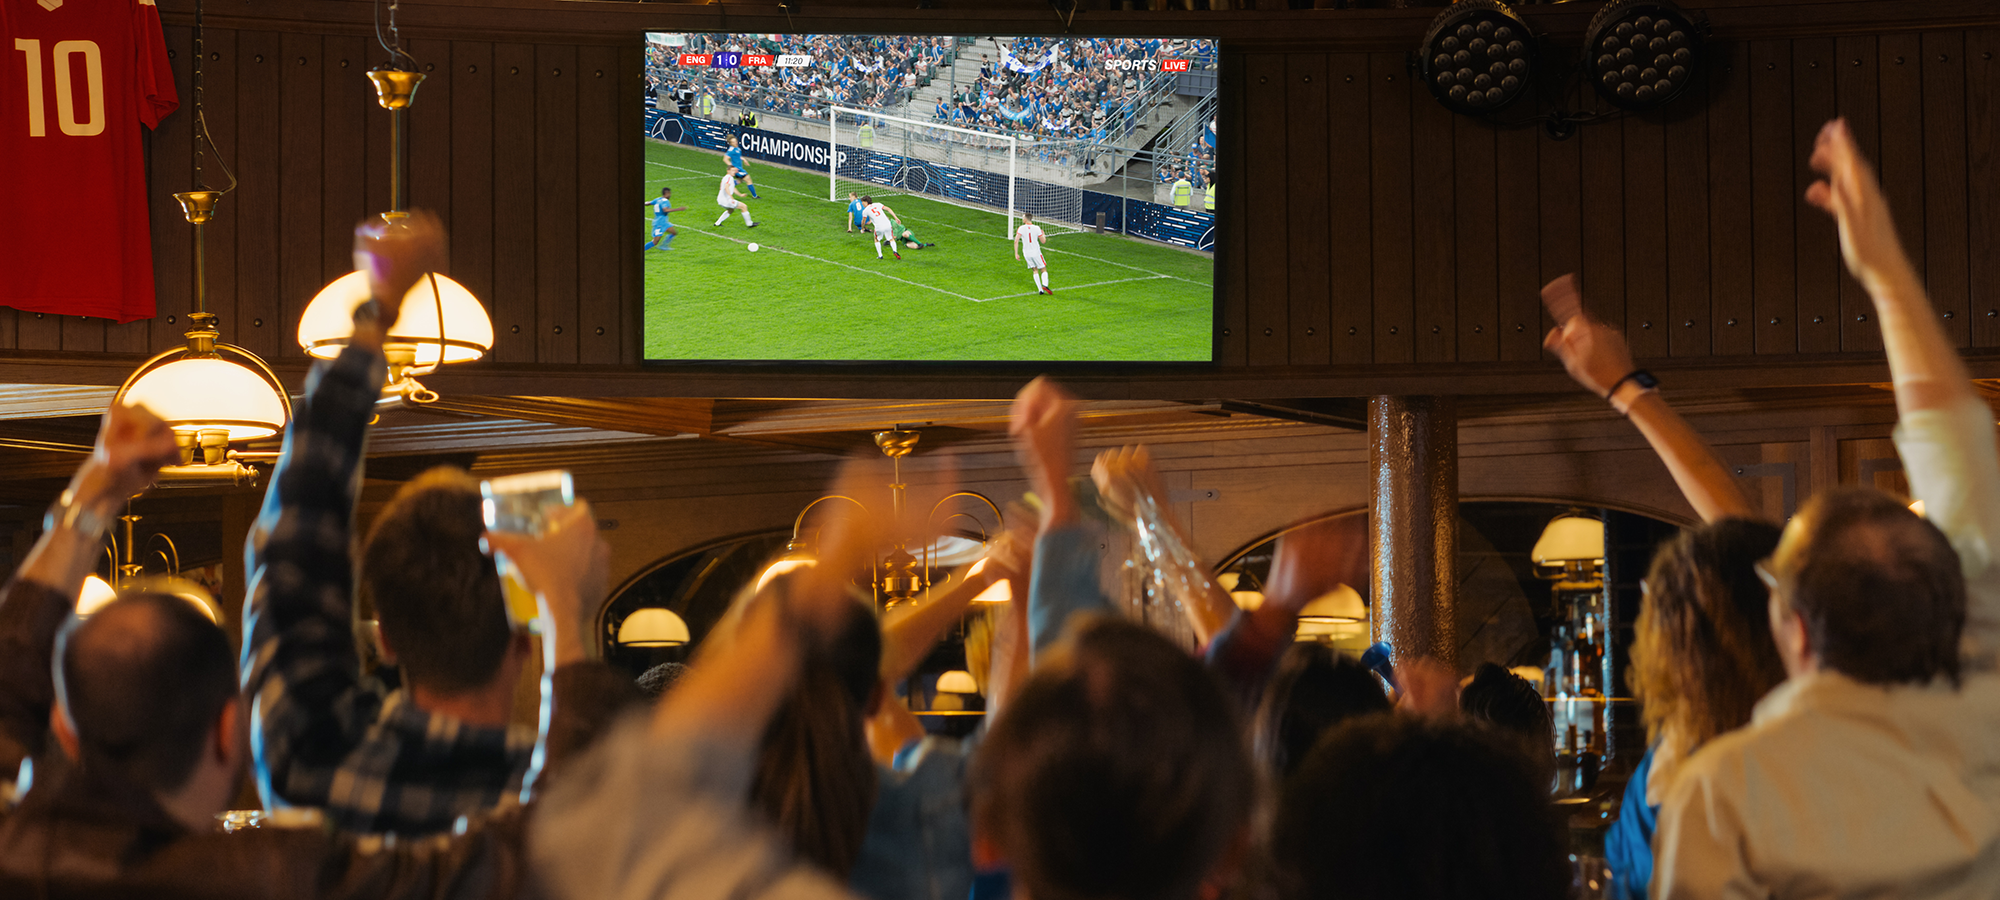 Sports fans celebrating while watching a soccer game on TV at a local sports bar.